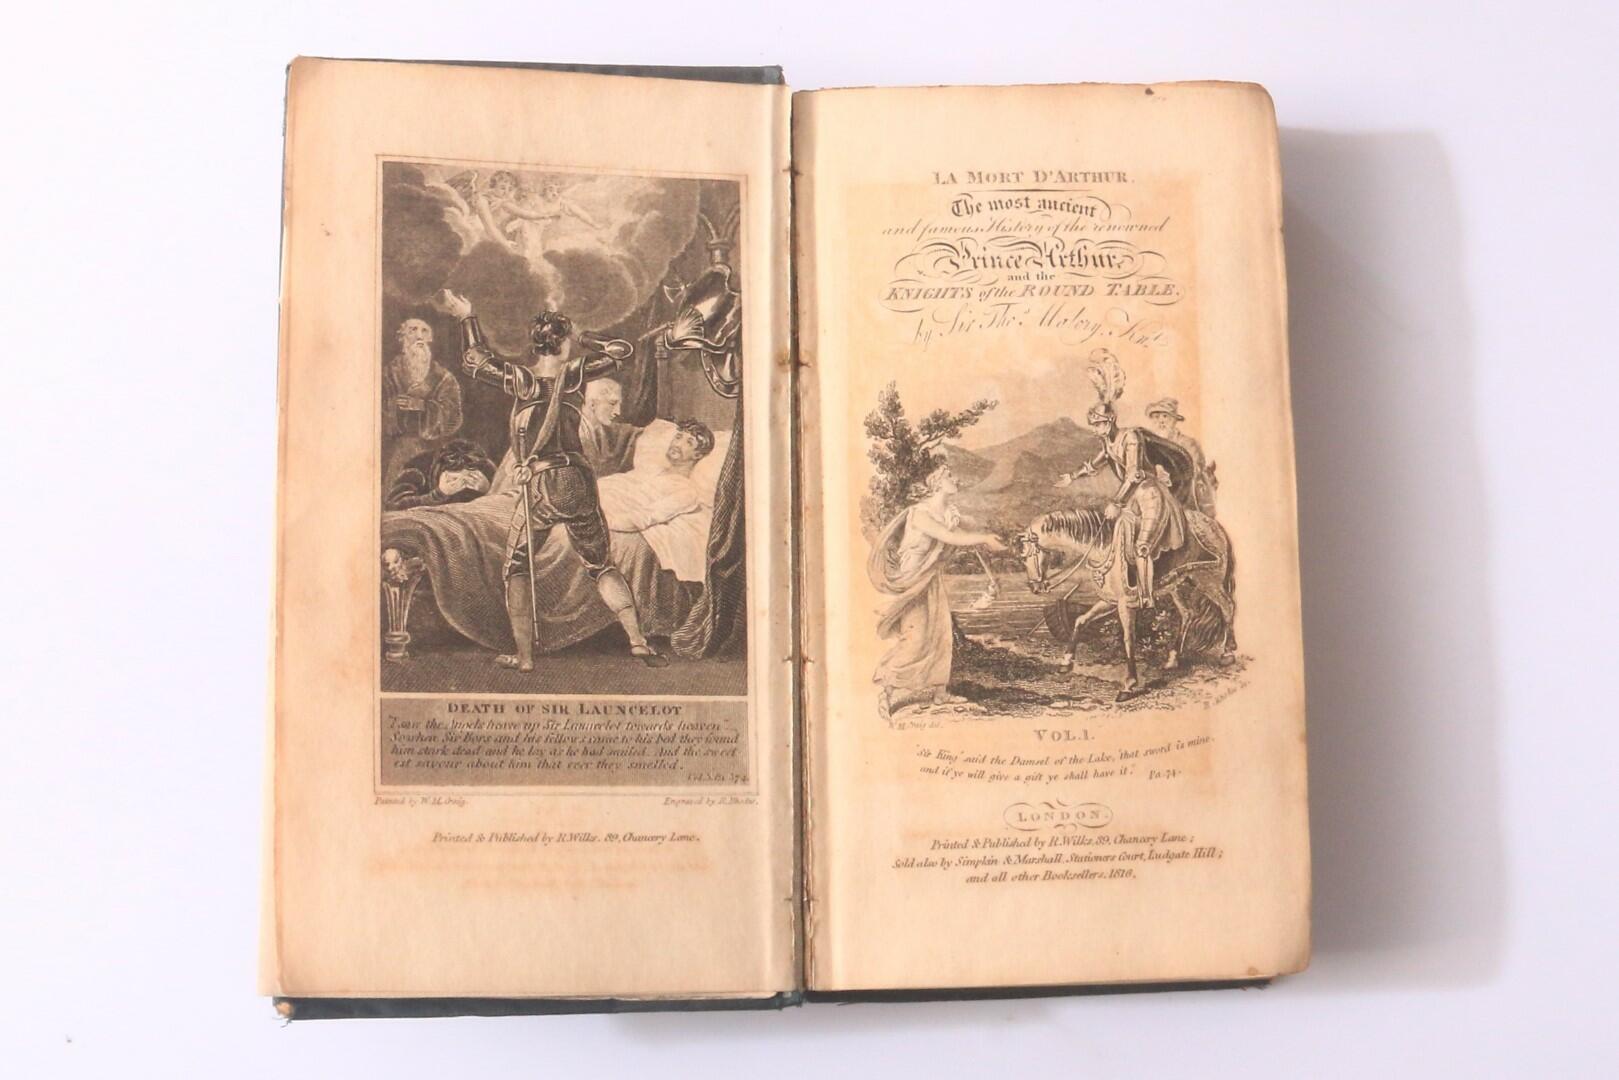 Thomas Malory - La Mort D'Arthur: The Most Ancient and Famous History of the Renowned Prince Arthur and the Knights of the Round Table - R. Wilks, 1816, First Edition.